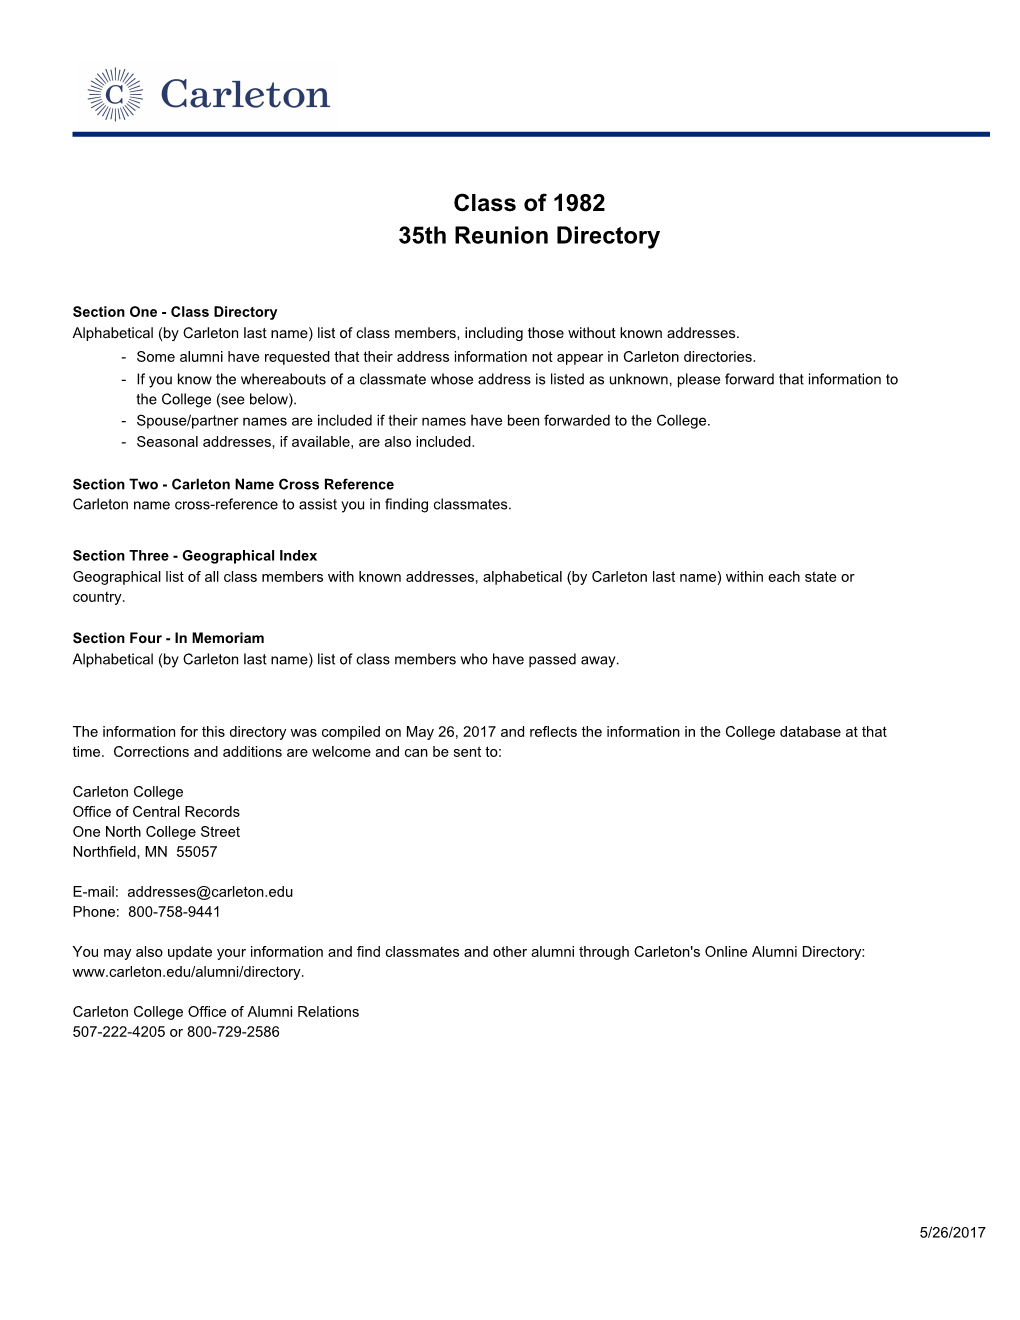 35Th Reunion Directory Class of 1982